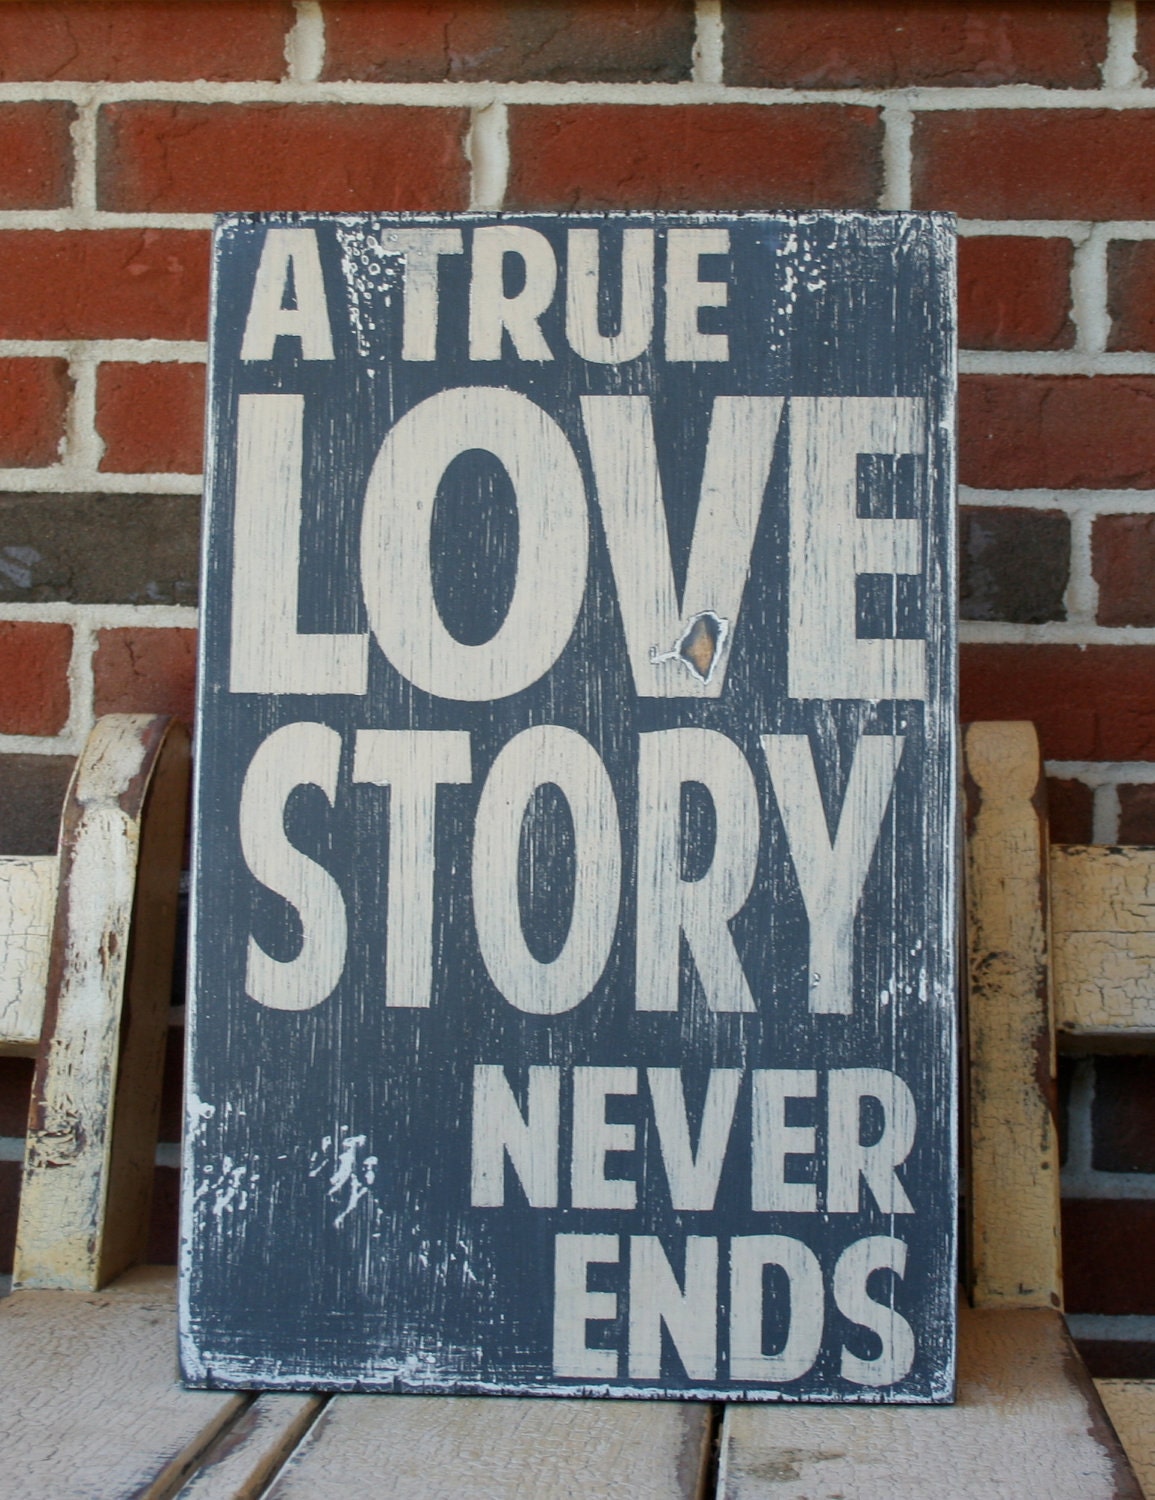 A True Love Story Never Ends Heavily Distressed Sign in Black Vintage Style